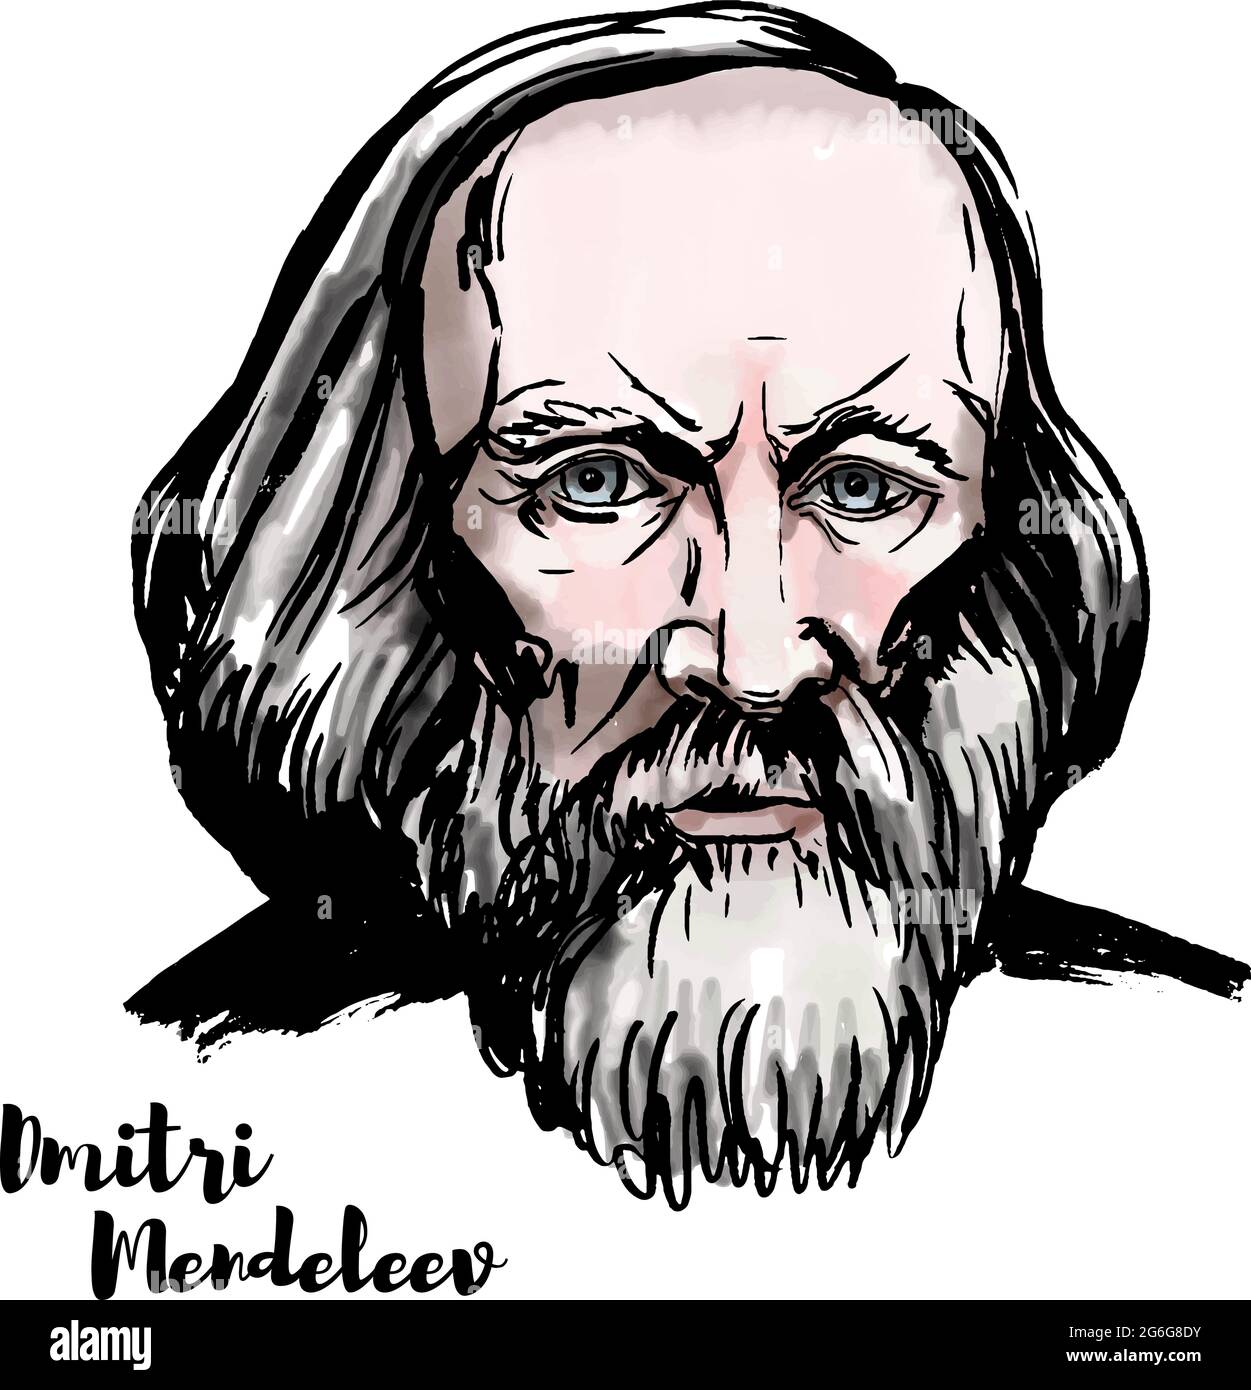 Dmitri Mendeleev watercolor vector portrait with ink contours. Russian chemist and inventor. Stock Vector